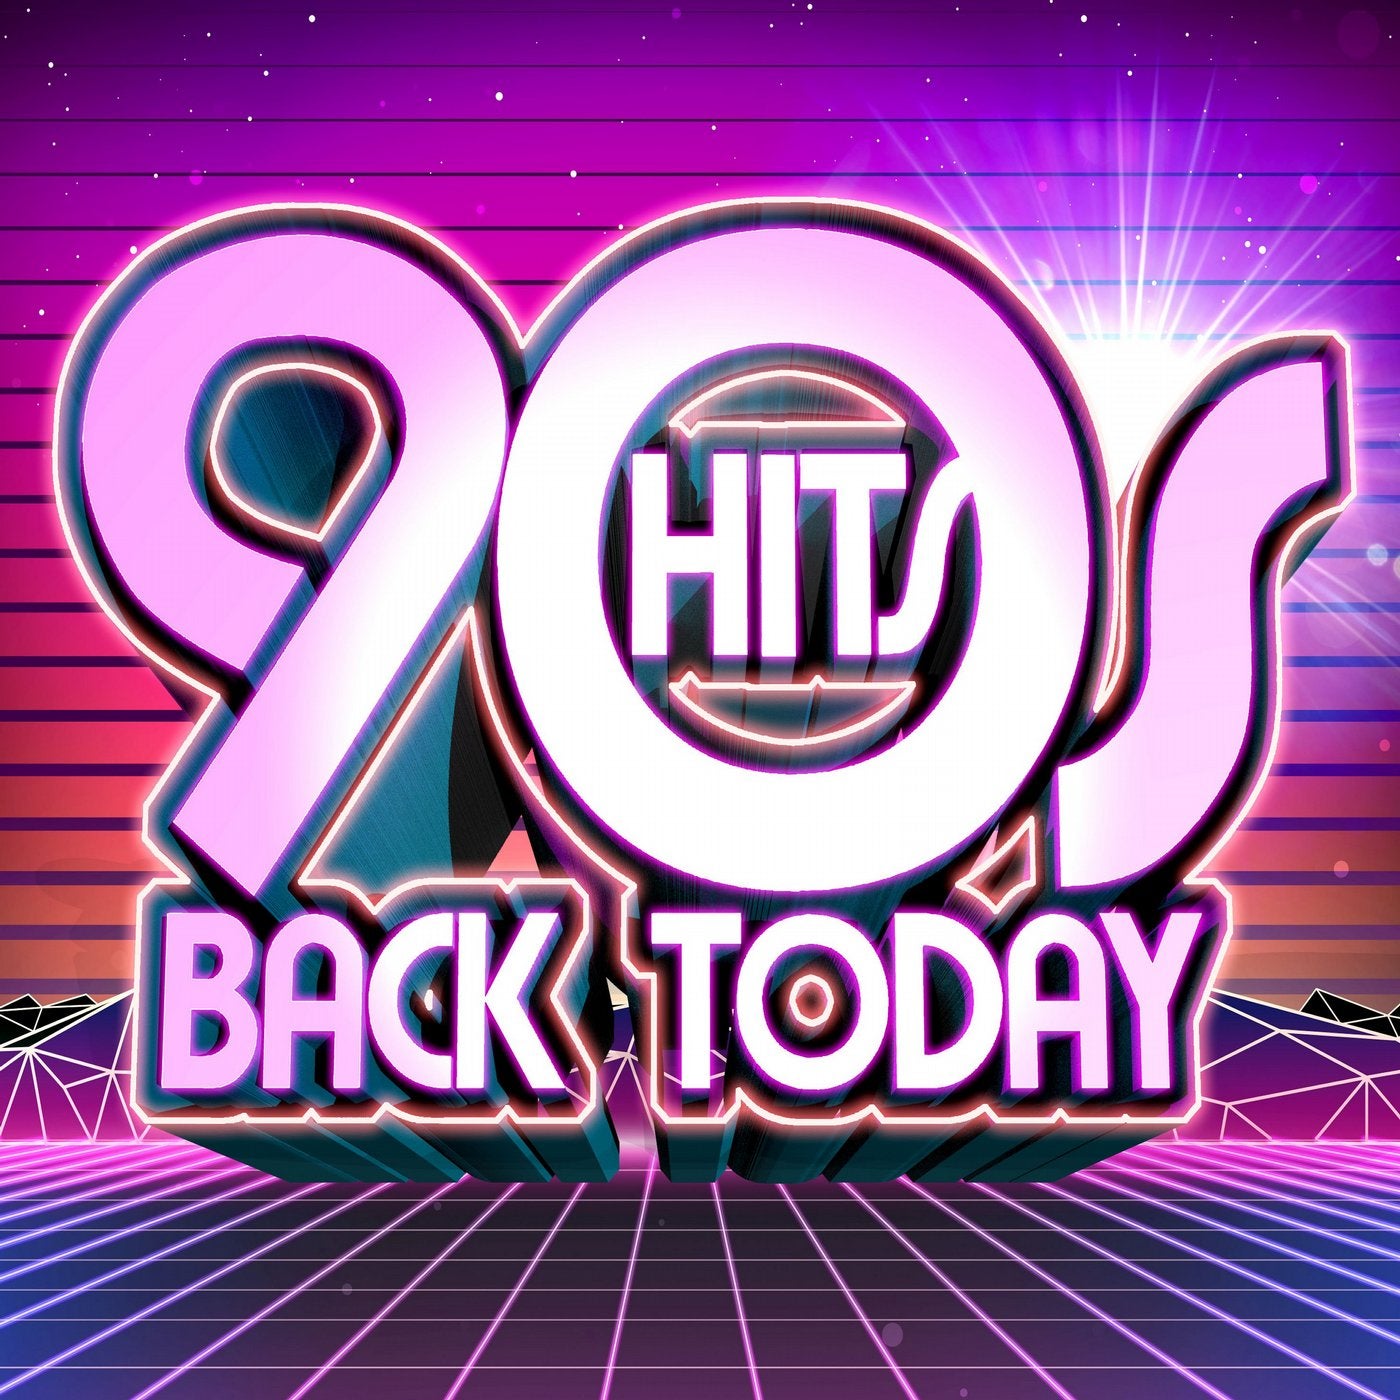 Hit me back. House 90s Hits. 90'S Eurodance Hits обложки. Absolom Remembering the 90s. Club Mix 90's.